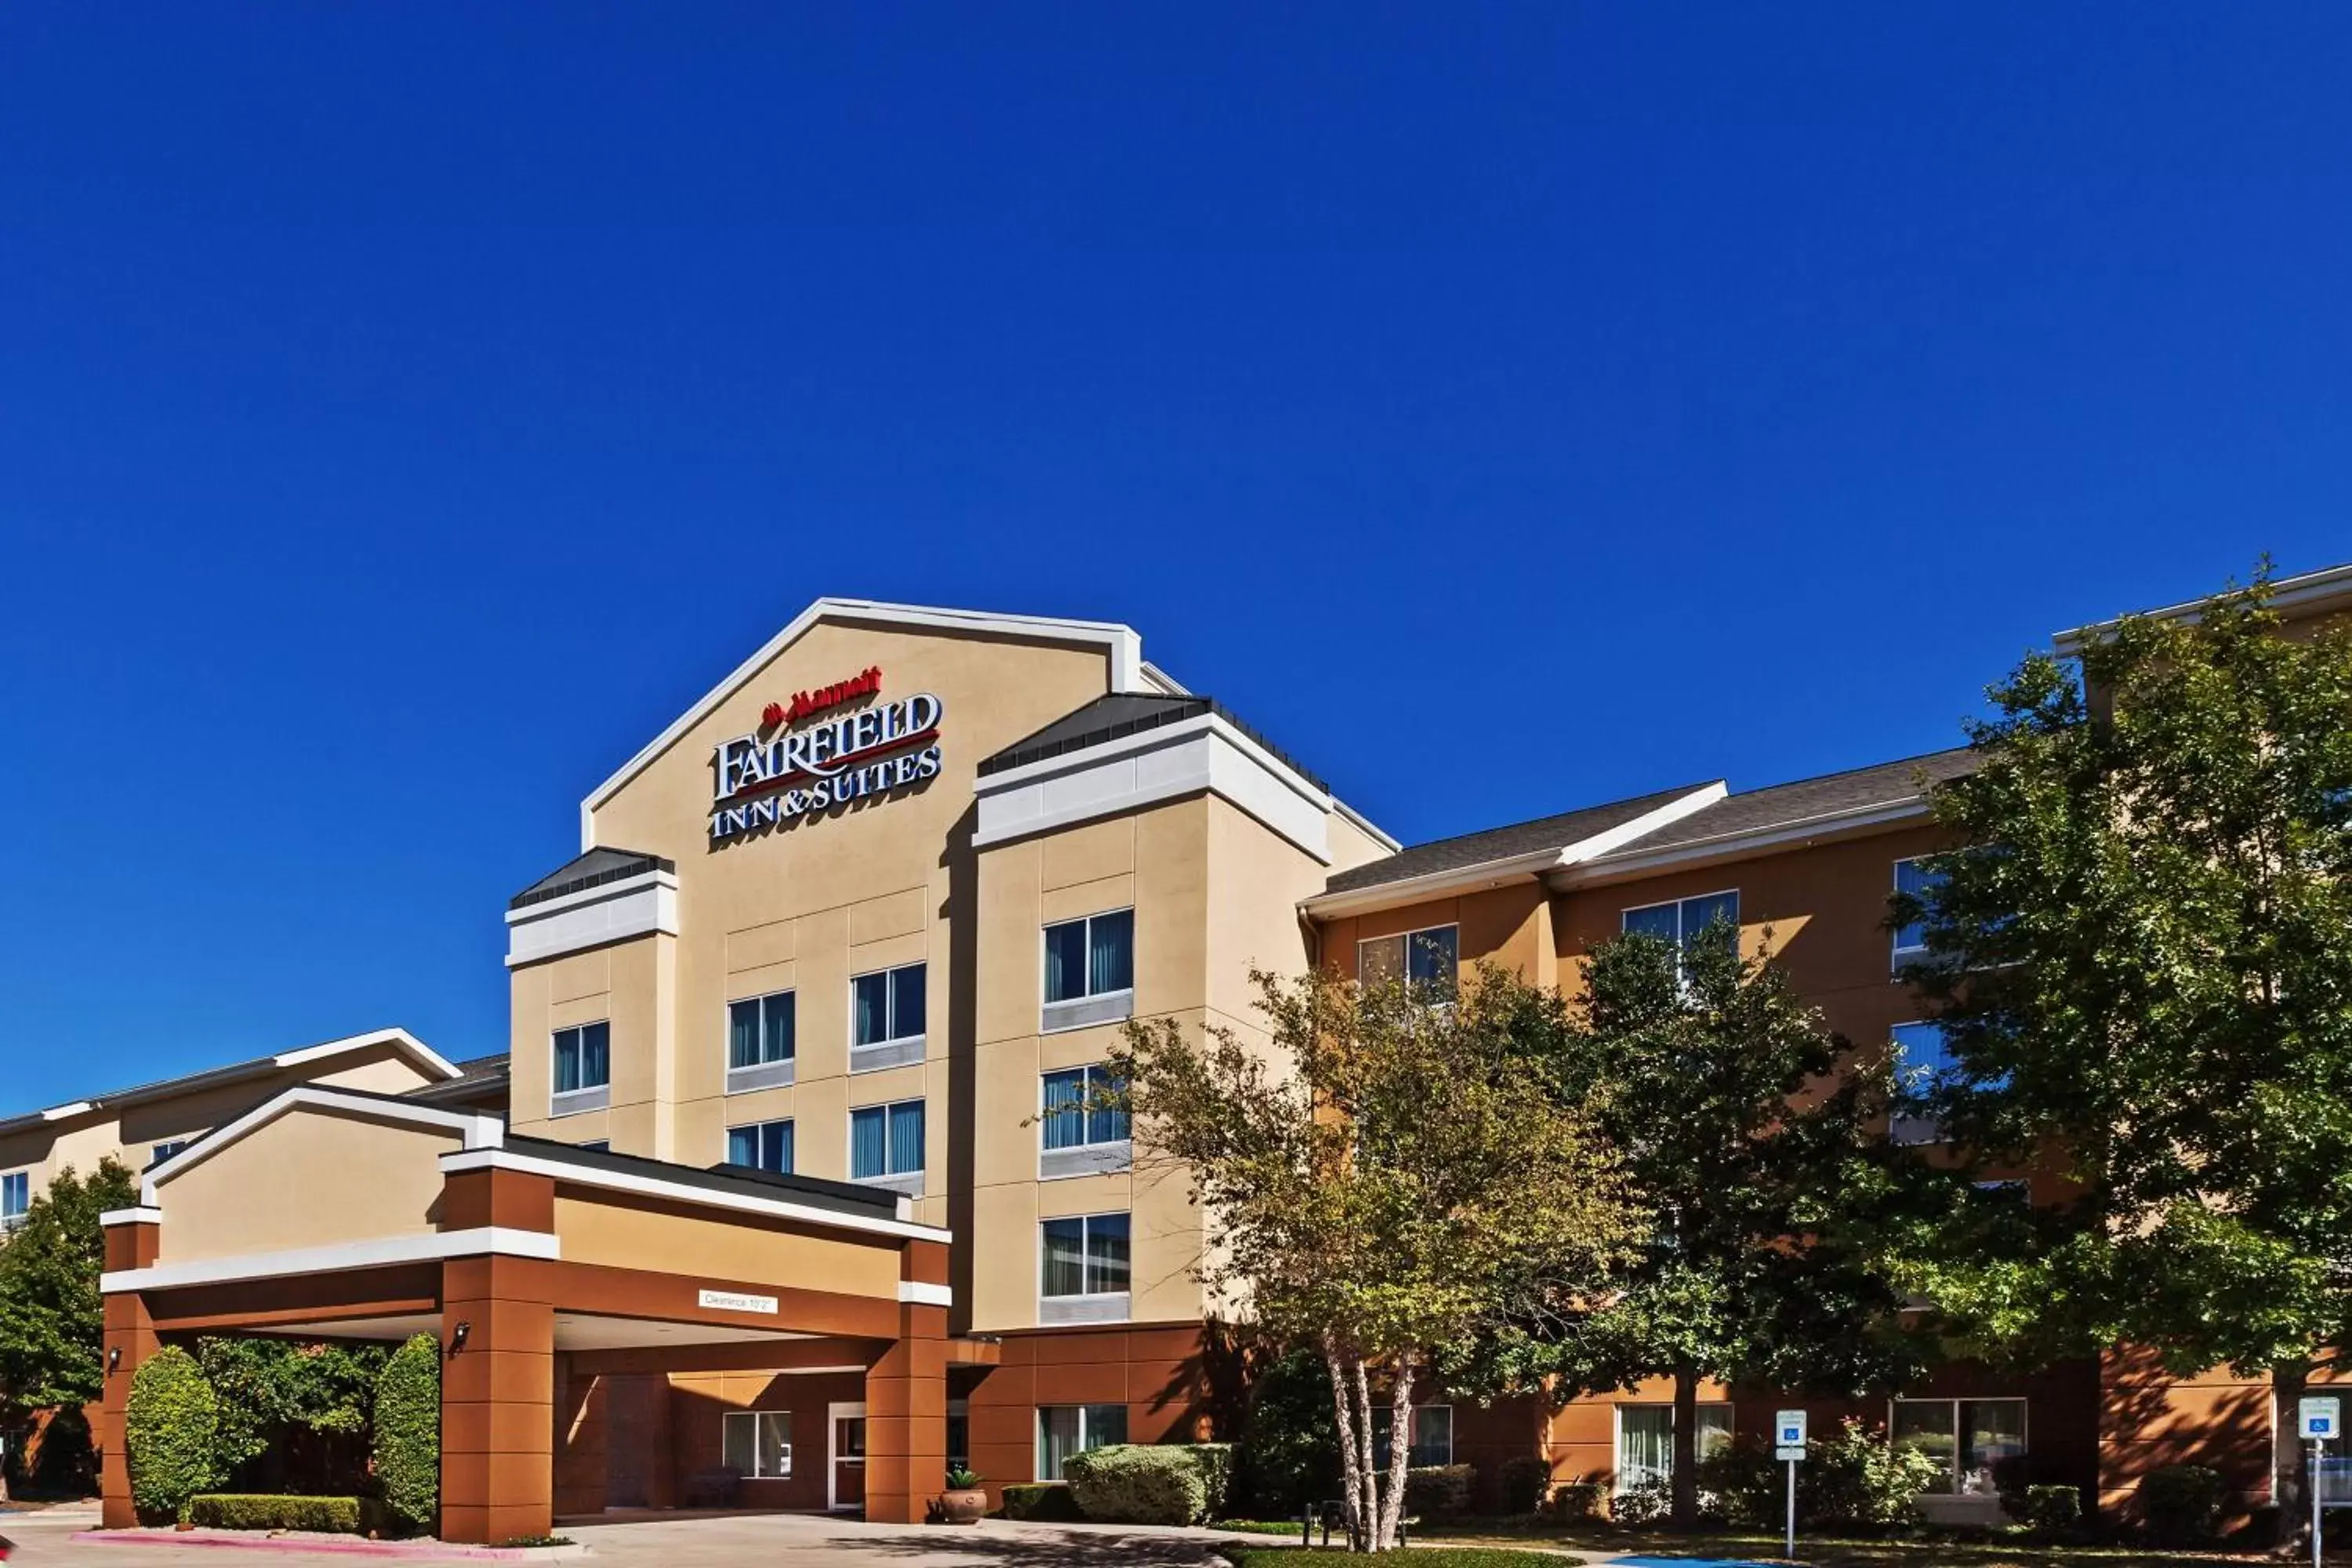 Property Building in Fairfield Inn and Suites by Marriott Austin Northwest/The Domain Area